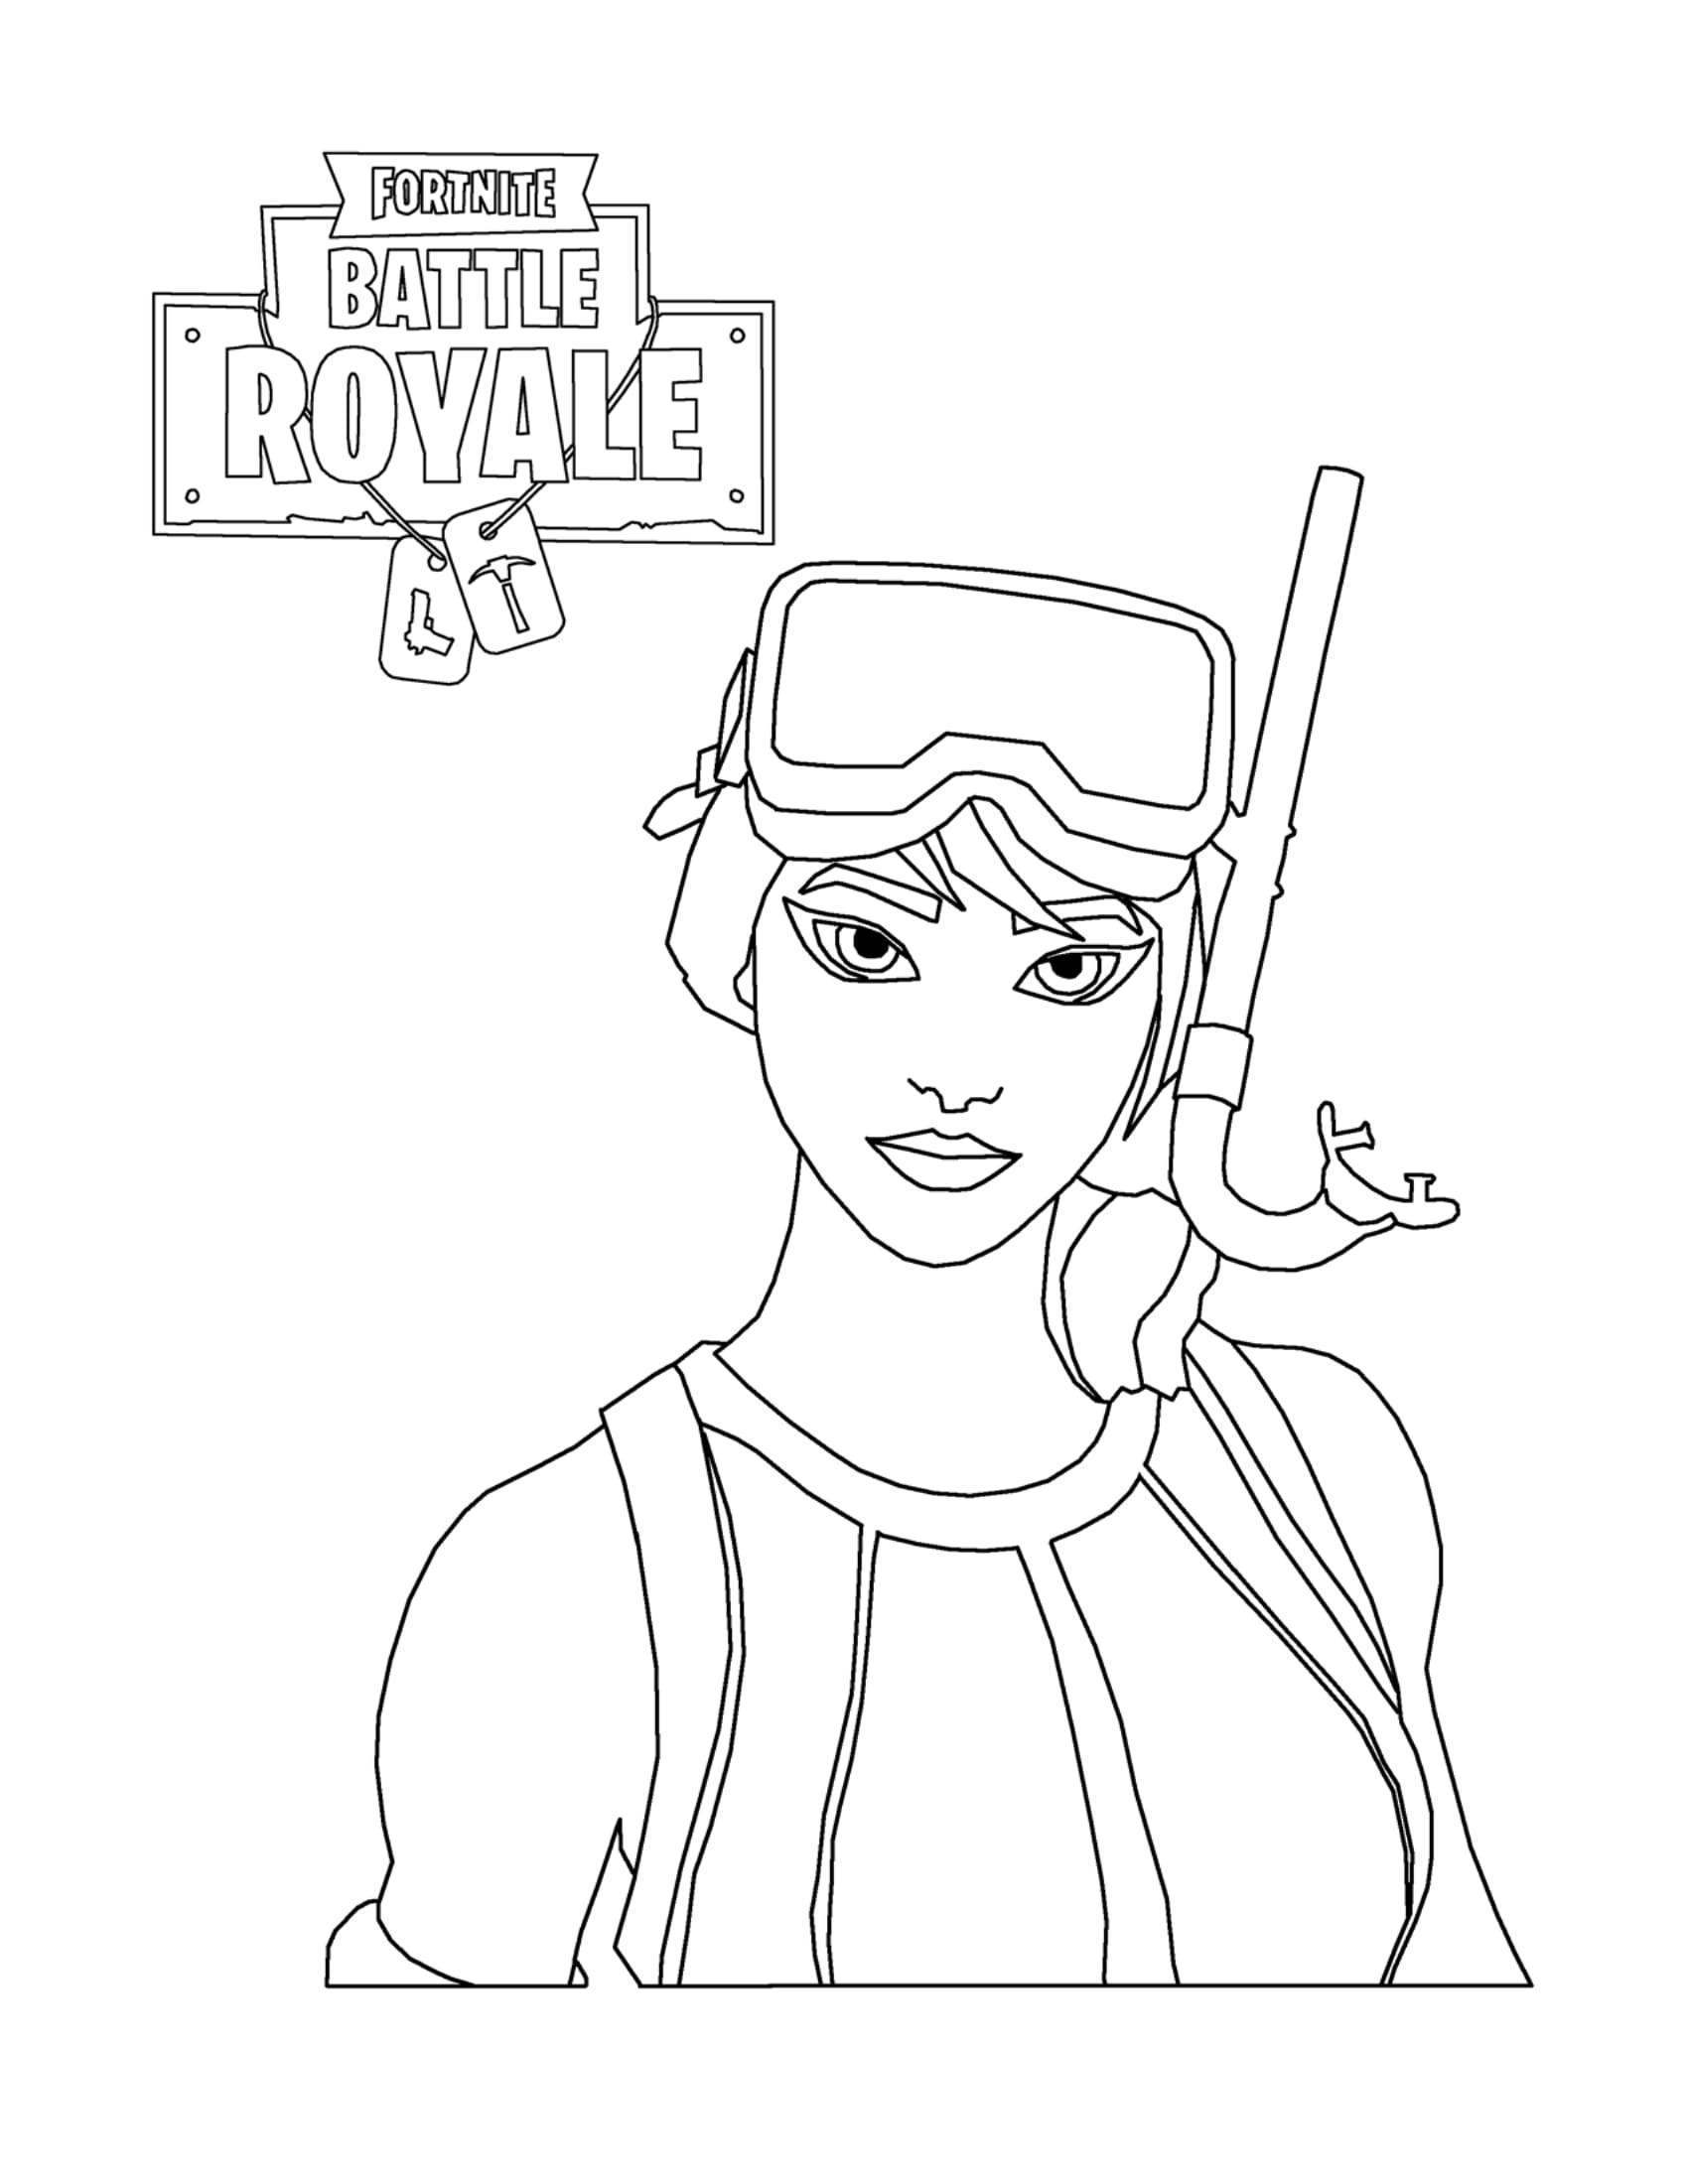 Download New Fortnite Skin Coloring Pages Character Drawing Pictures - Free Printable Coloring Pages